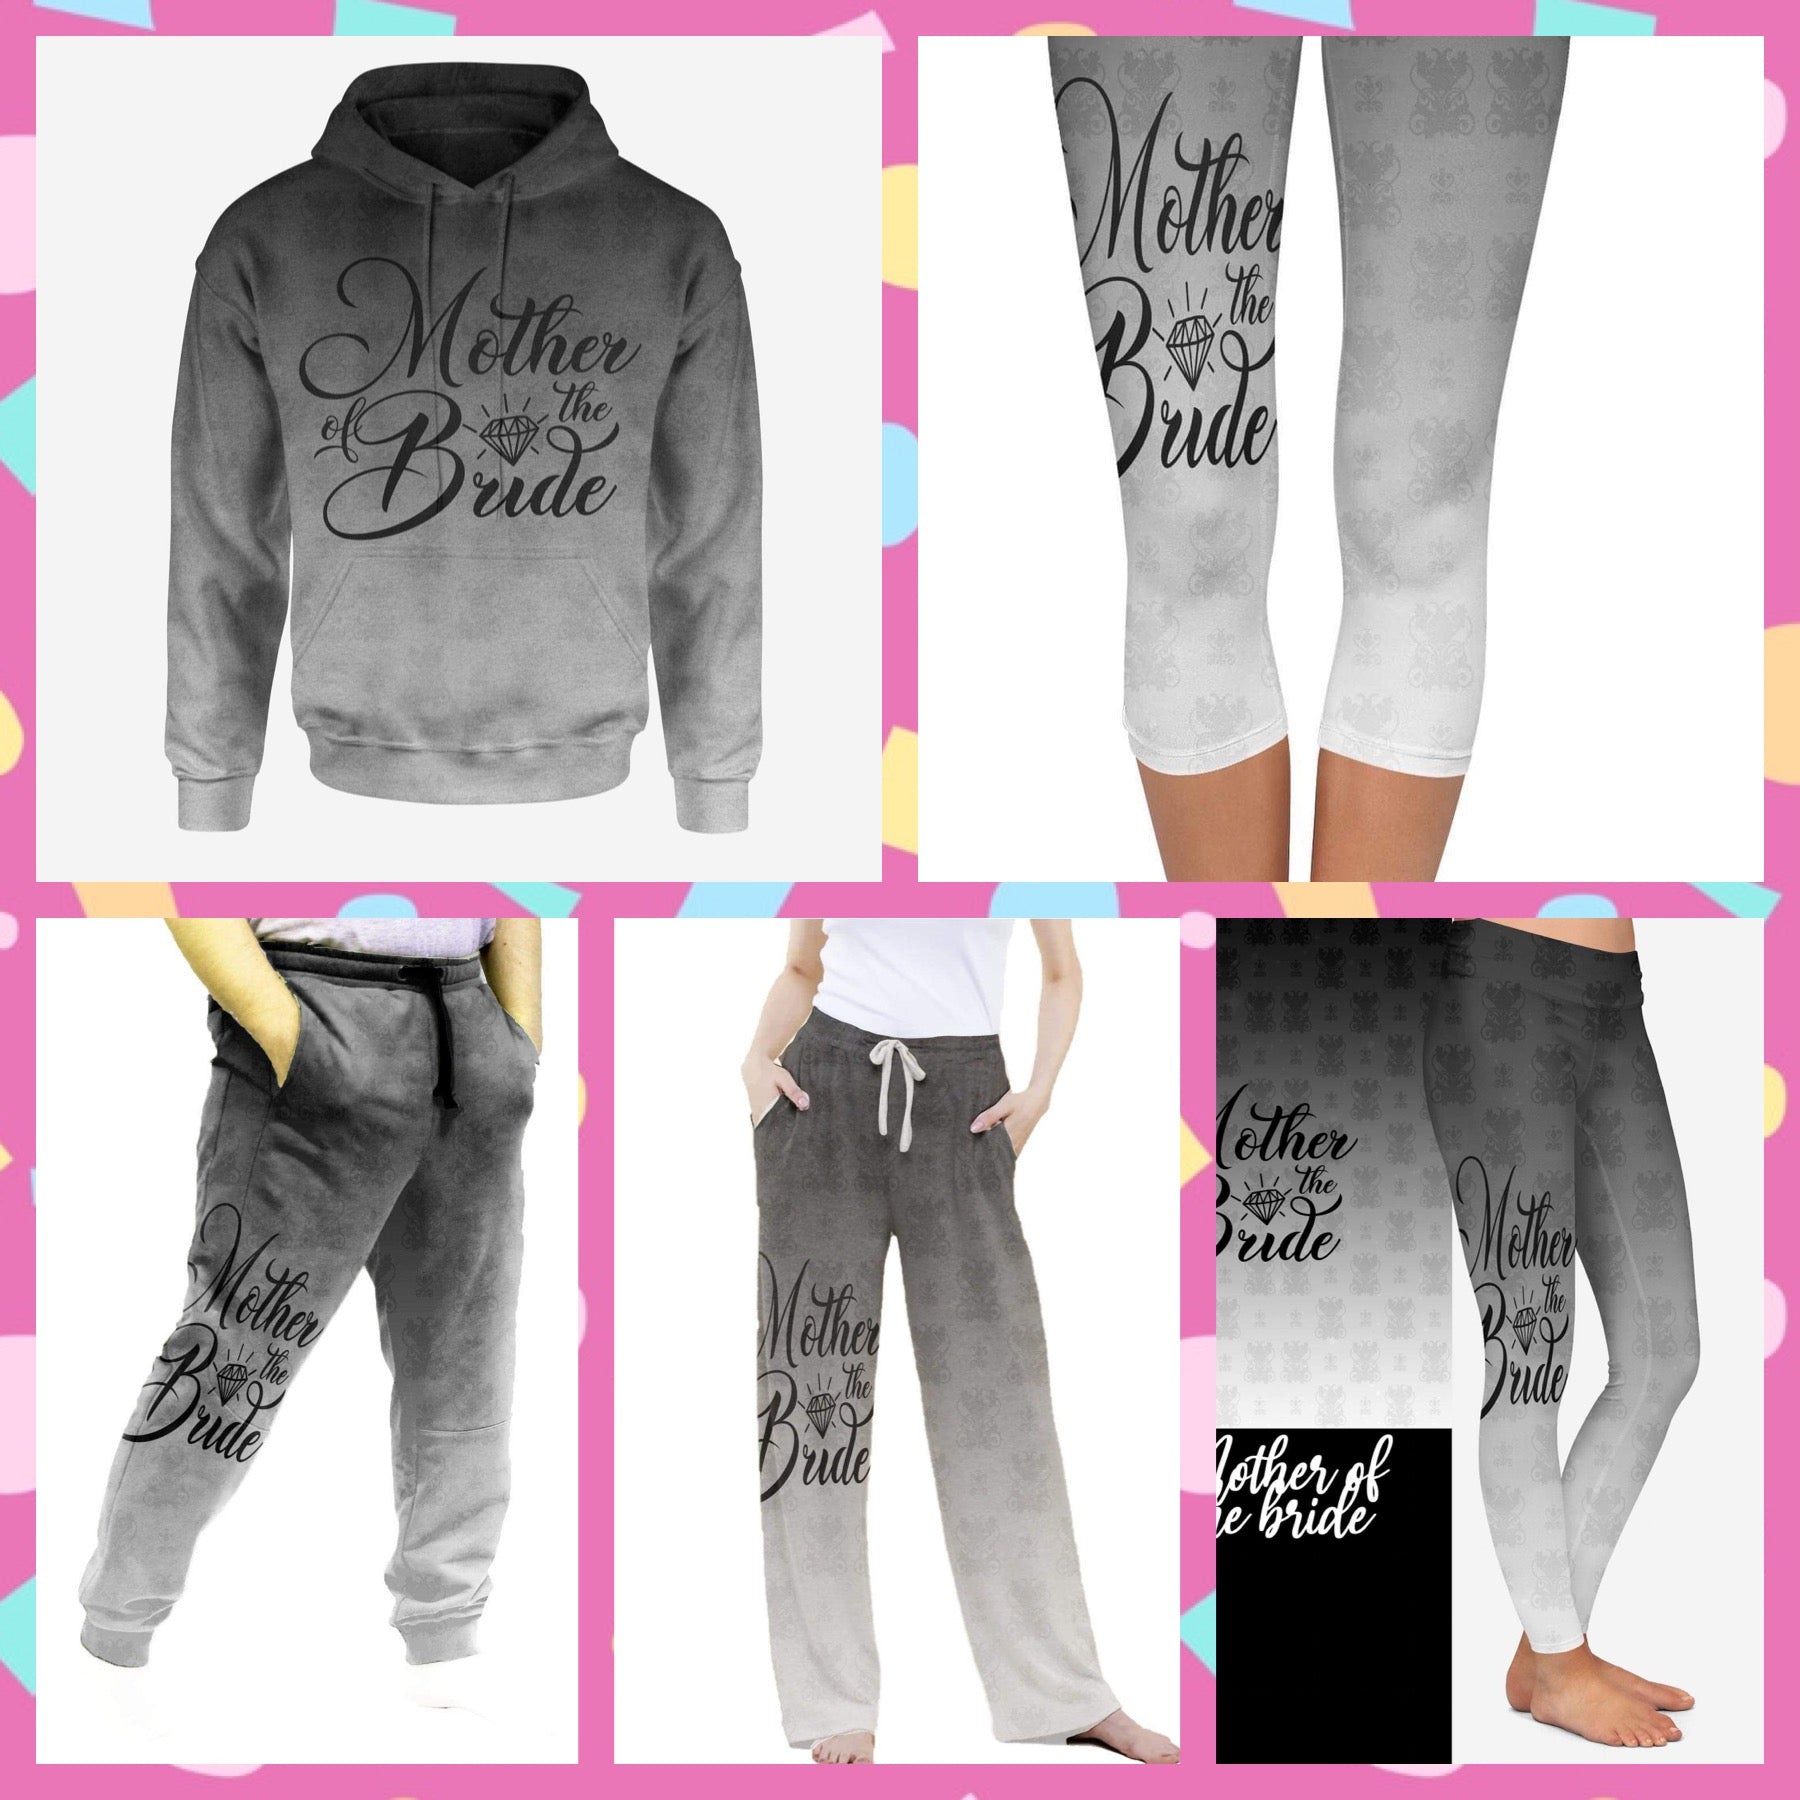 “Mother of the Bride” Hoodies, Leggings and Joggers